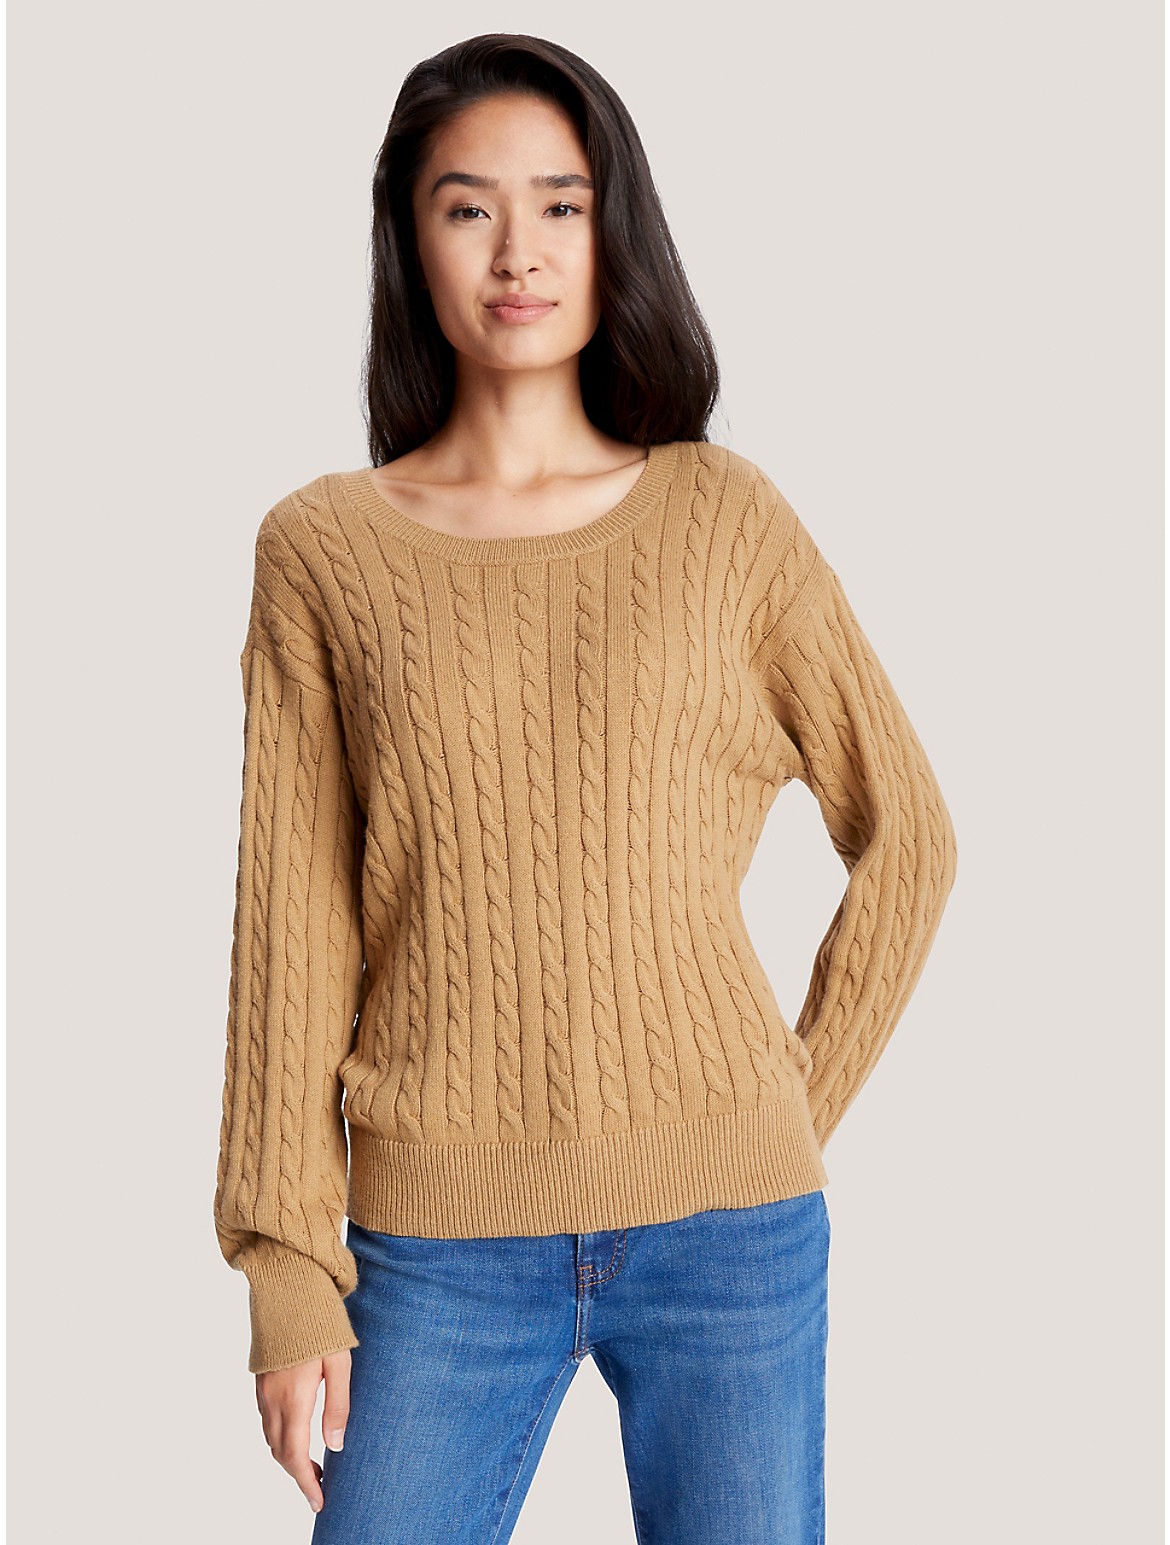 Tommy Hilfiger Women's Relaxed Fit Cable Knit Sweater